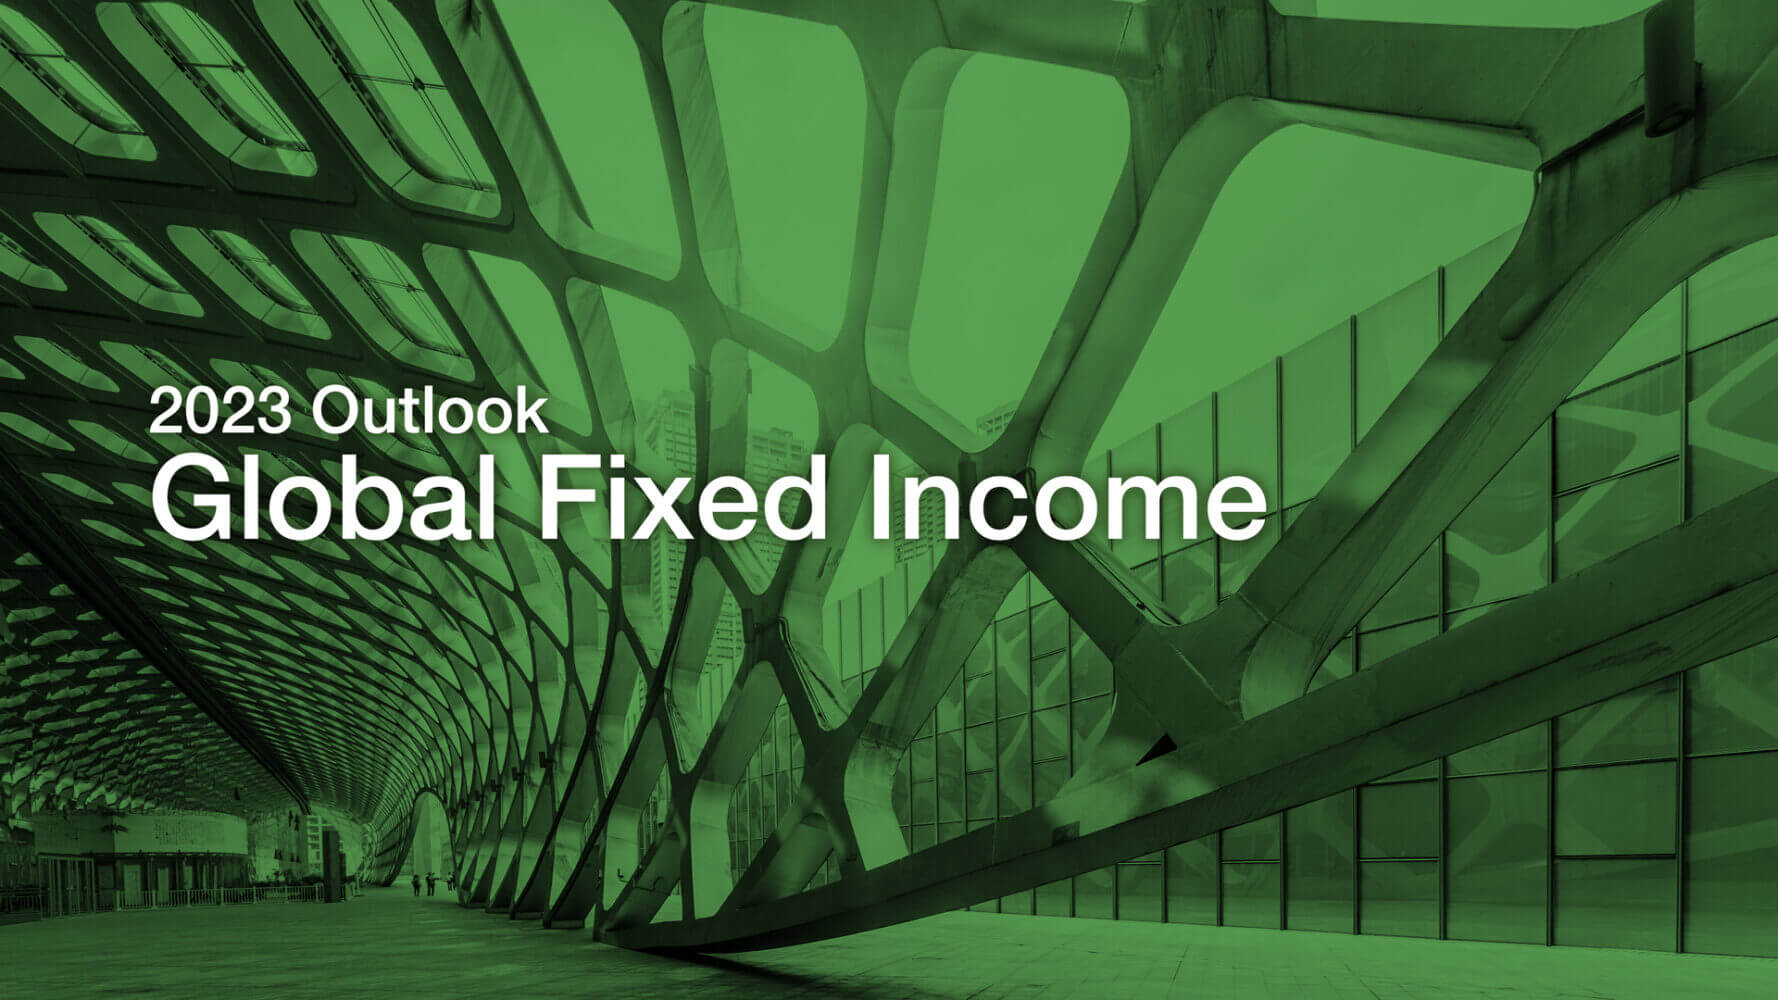 Thornburg Investment Management 2023 Outlook Global Fixed Income